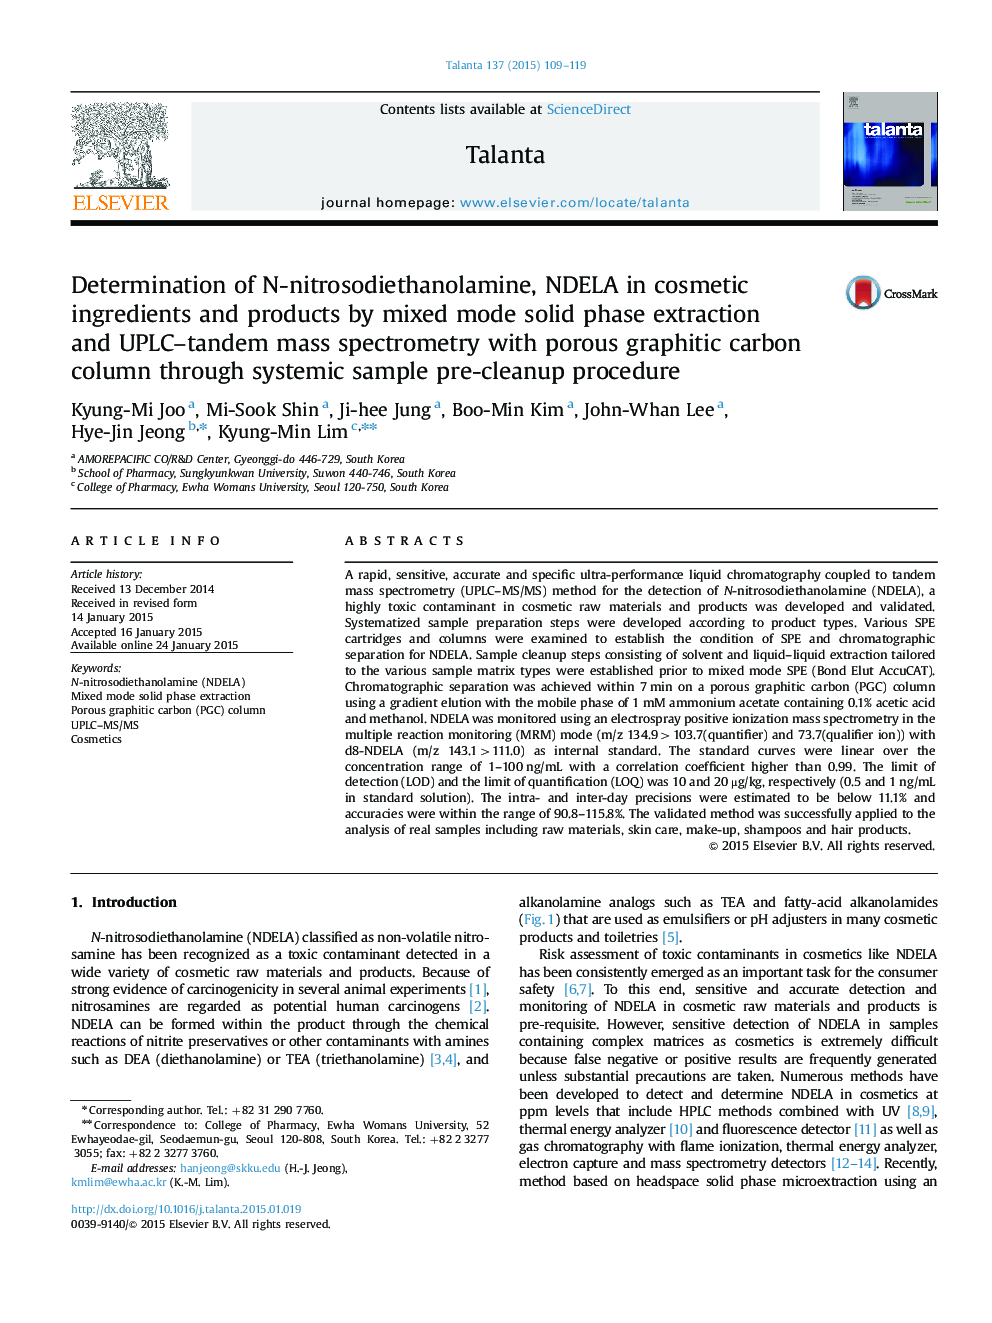 Determination of N-nitrosodiethanolamine, NDELA in cosmetic ingredients and products by mixed mode solid phase extraction and UPLC-tandem mass spectrometry with porous graphitic carbon column through systemic sample pre-cleanup procedure